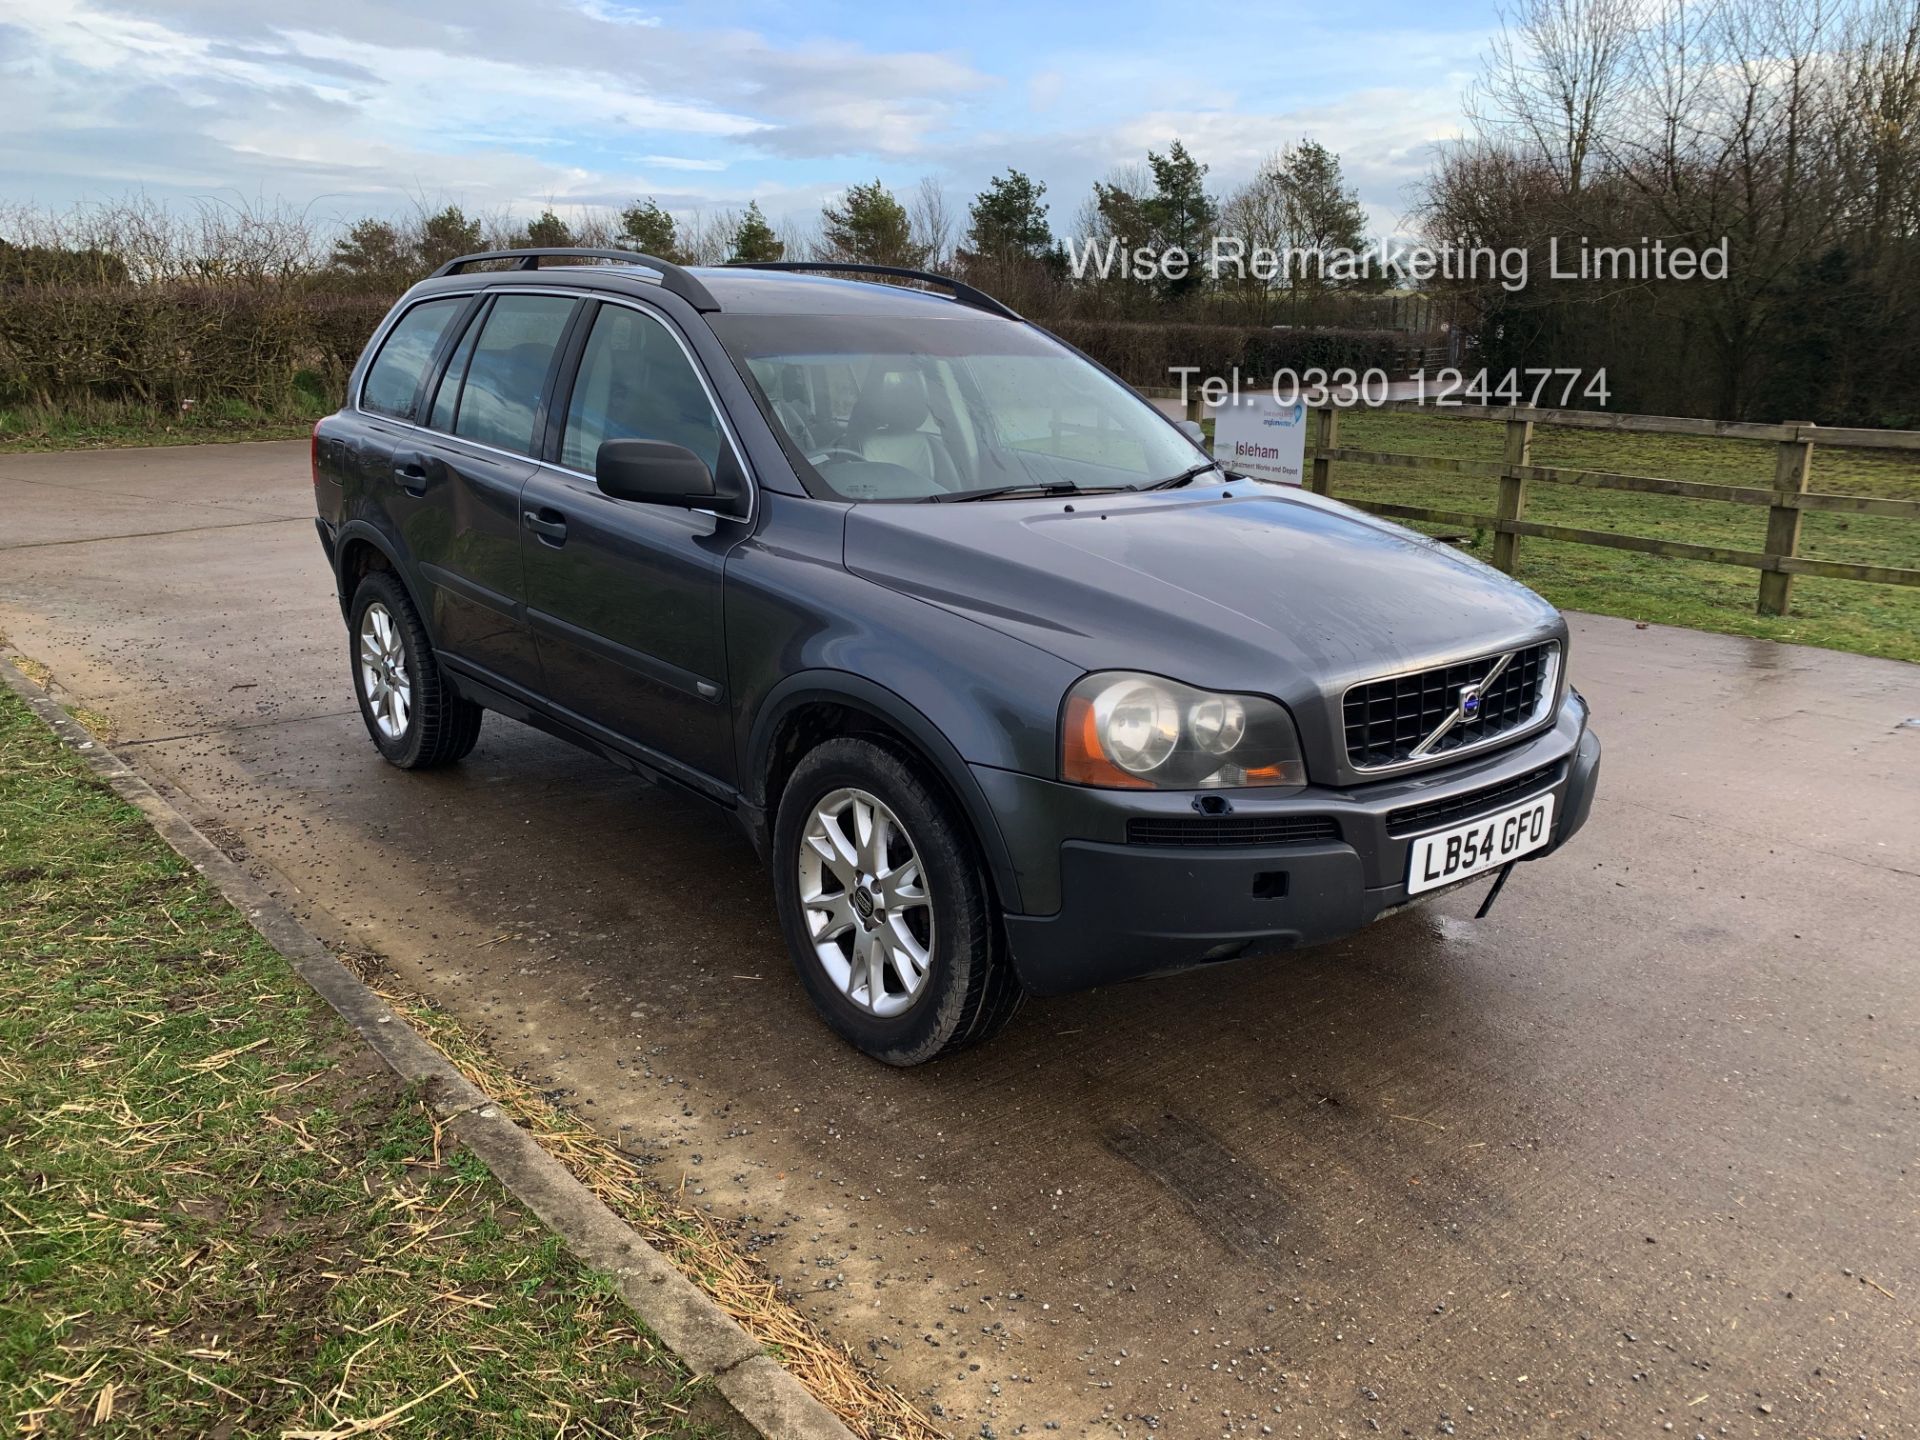 (RESERVE MET) Volvo XC90 D5 2.4 Special Equipment Auto - 2005 Model - 7 Seater - Full Leather - - Image 4 of 21